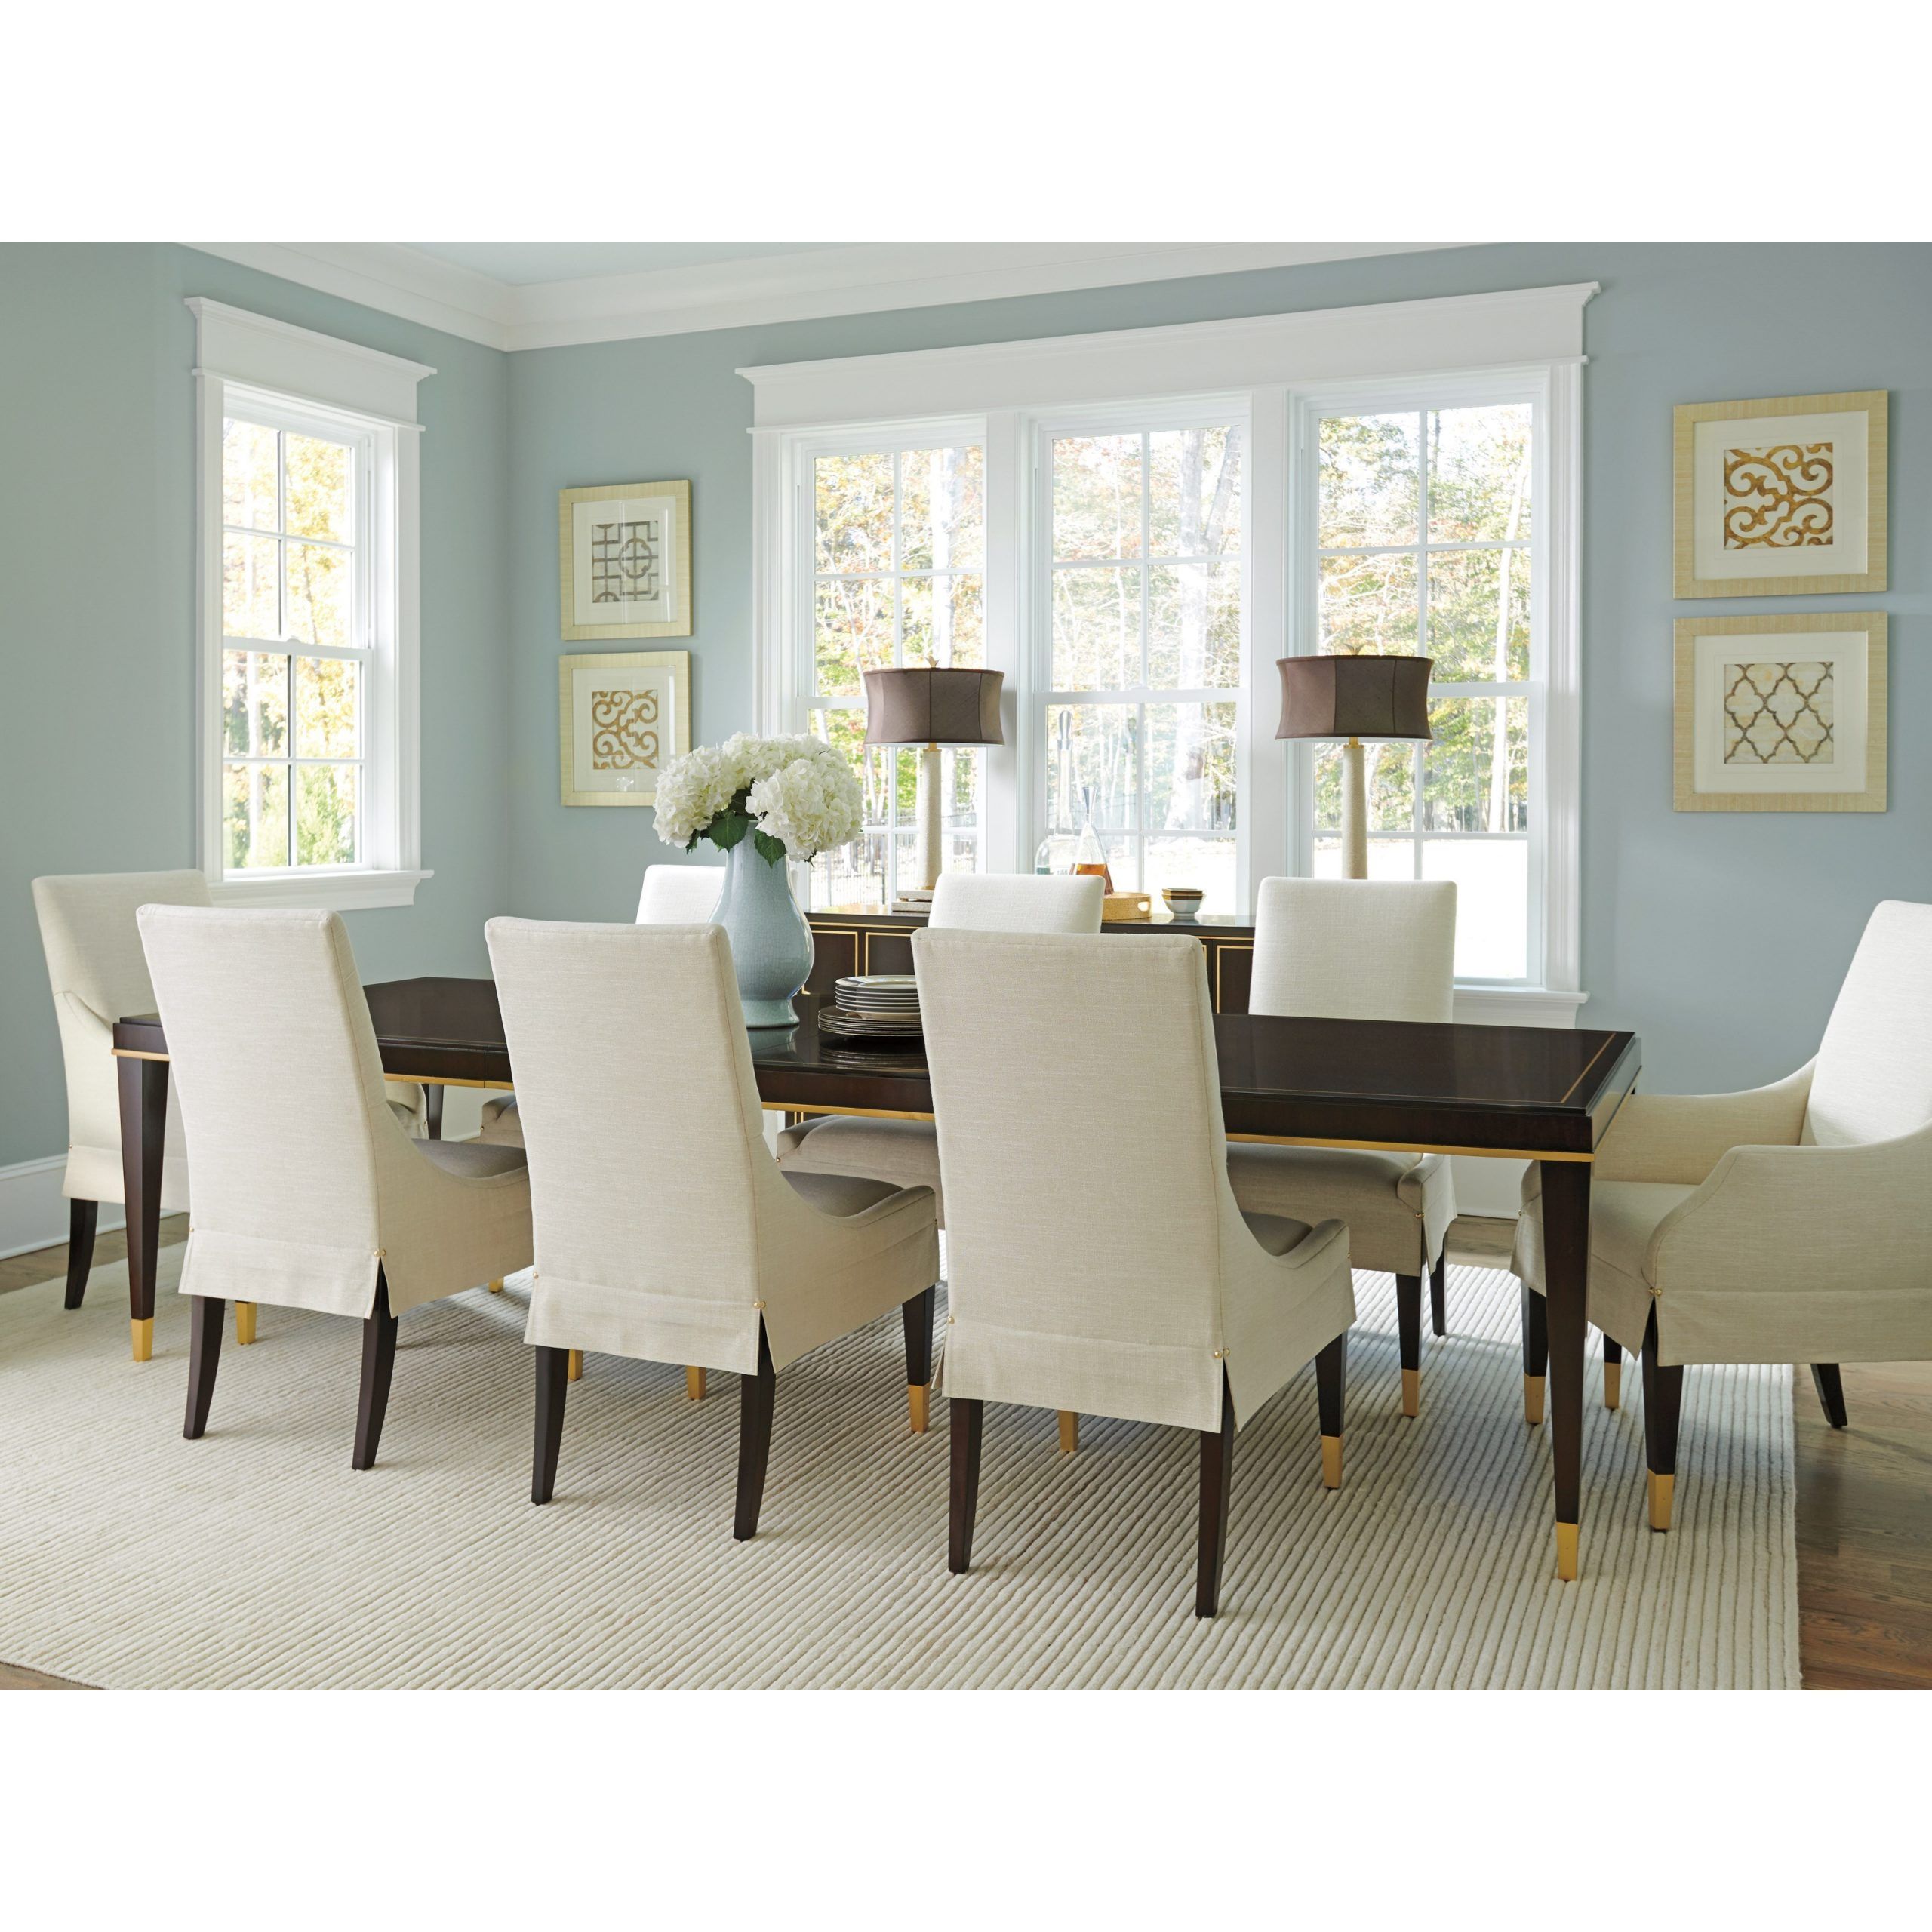 Lexington Carlyle Transitional 9 Piece Dining Set With Manhattan Table Throughout 9 Piece Square Dining Sets (View 8 of 15)